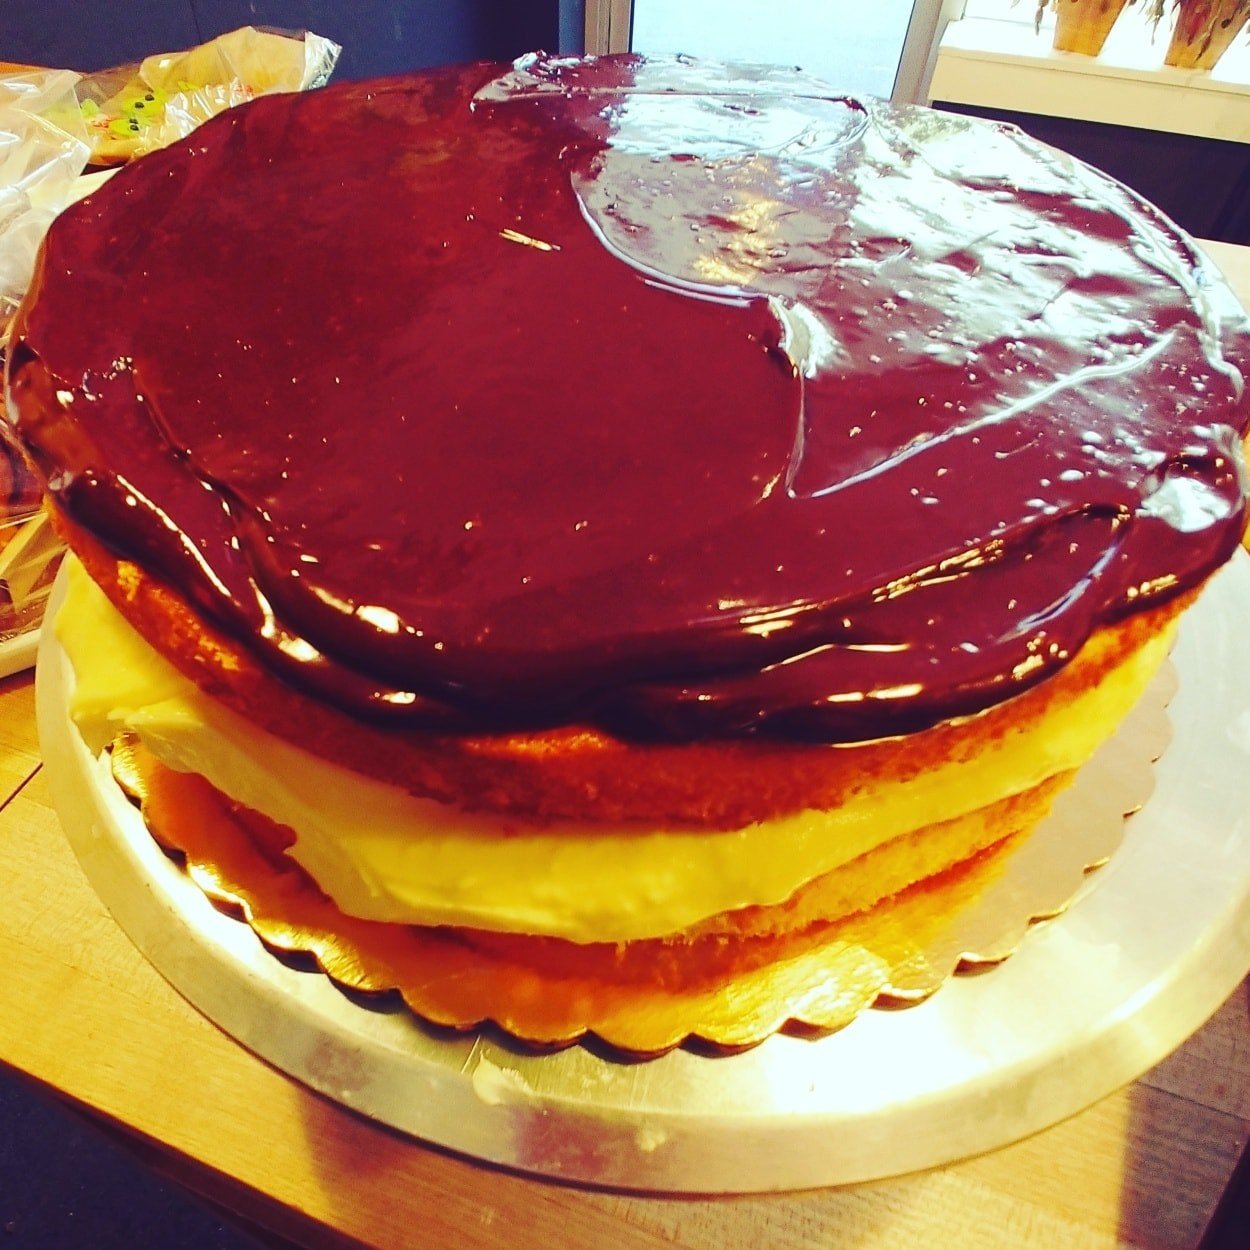 Homemade Boston Cream Pie. Two layers of golden sponge cake, sandwiched with thick vanilla pastry cream. And of course, topped with a rich dark chocolate glaze.